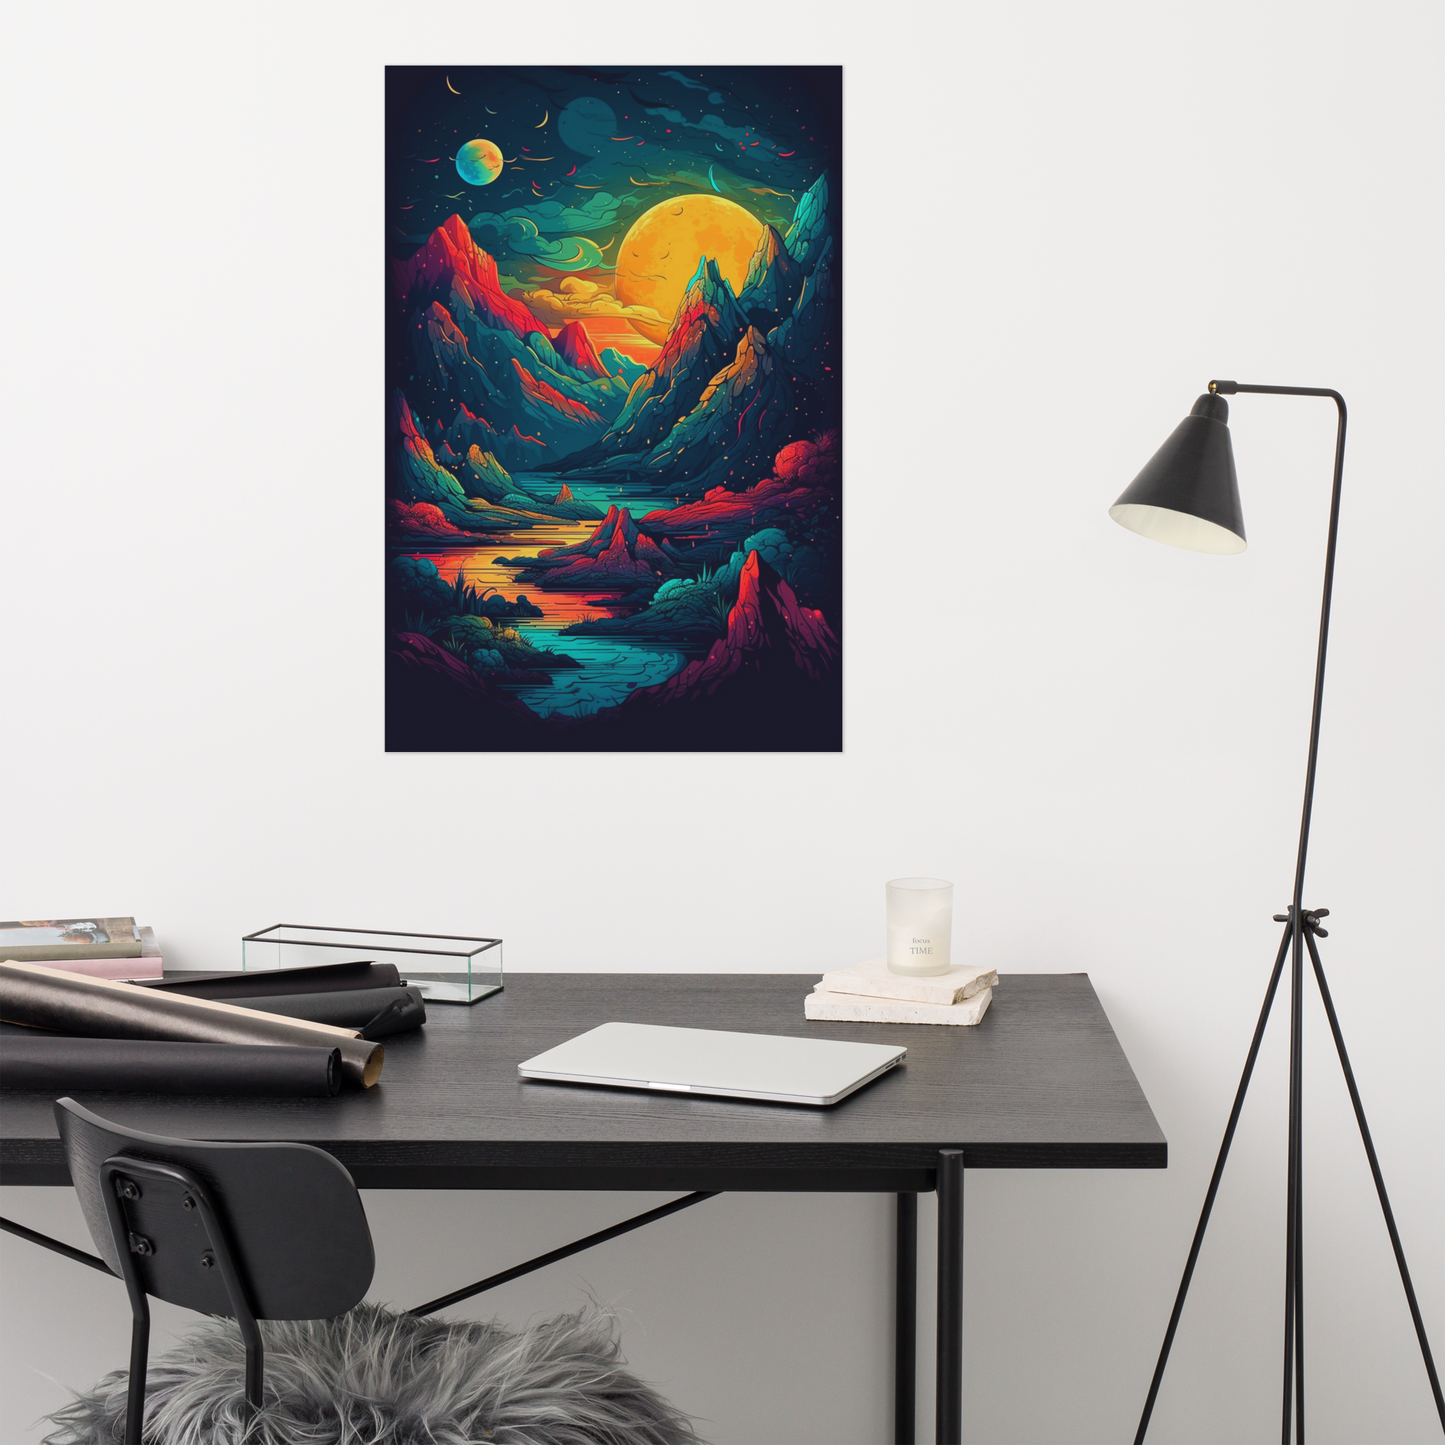 Colorful Poster: Fantasy Art of Extraterrestrial Landscape with Fiery Sunset and Planetary Sky